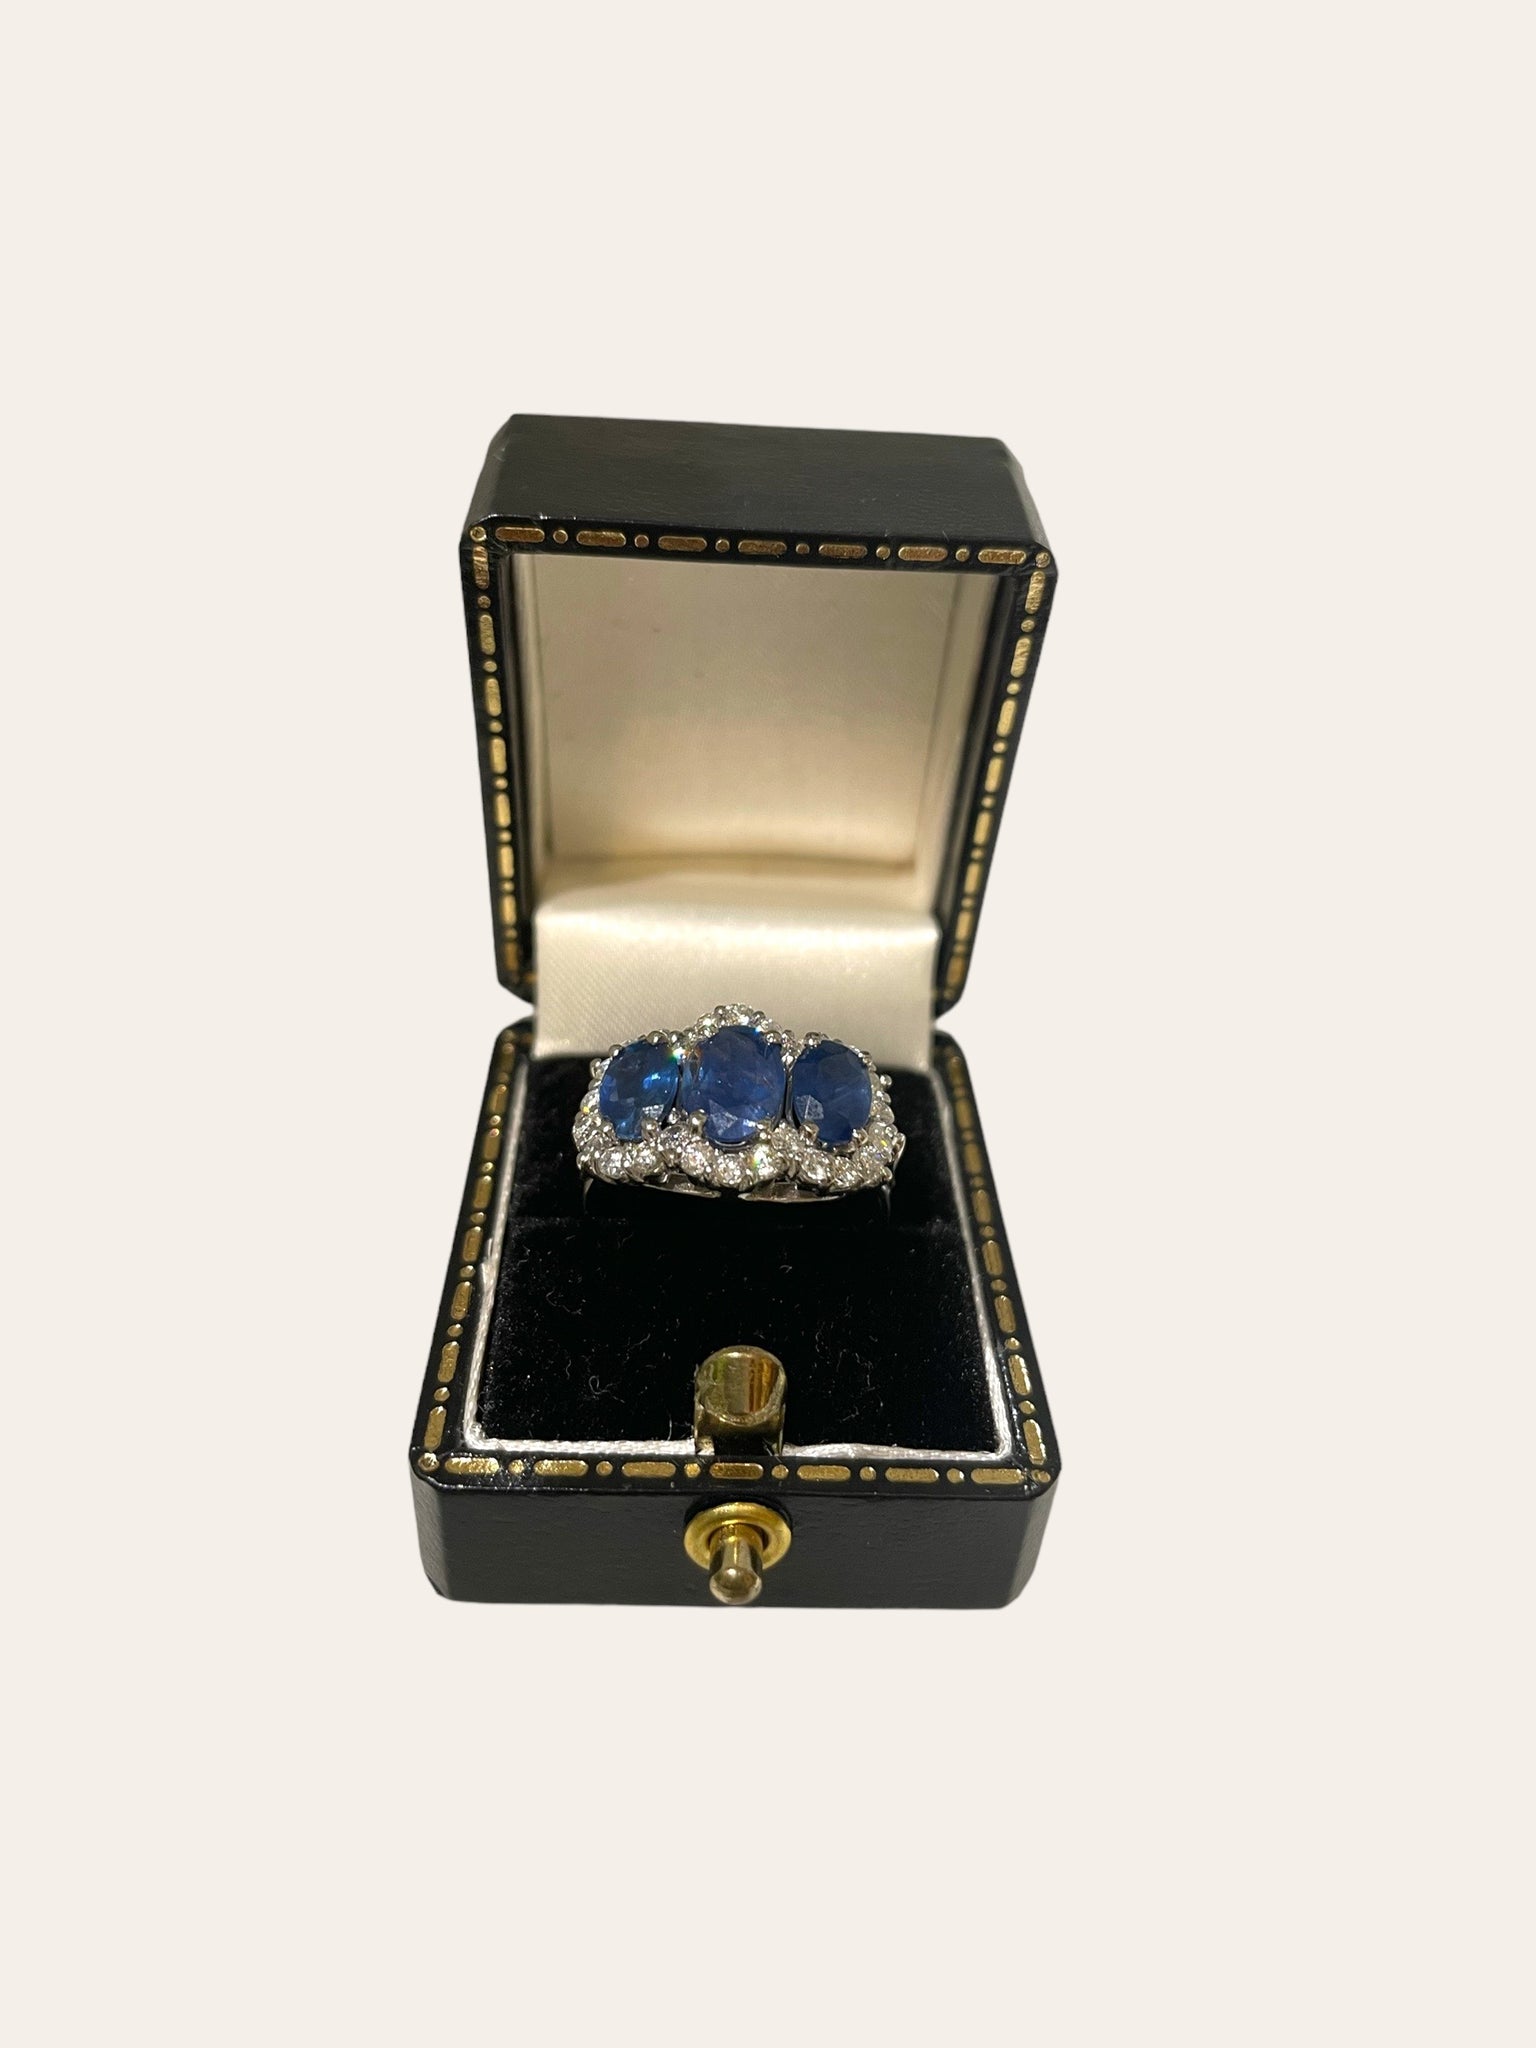 White gold ring with sapphire and brilliant cut diamonds